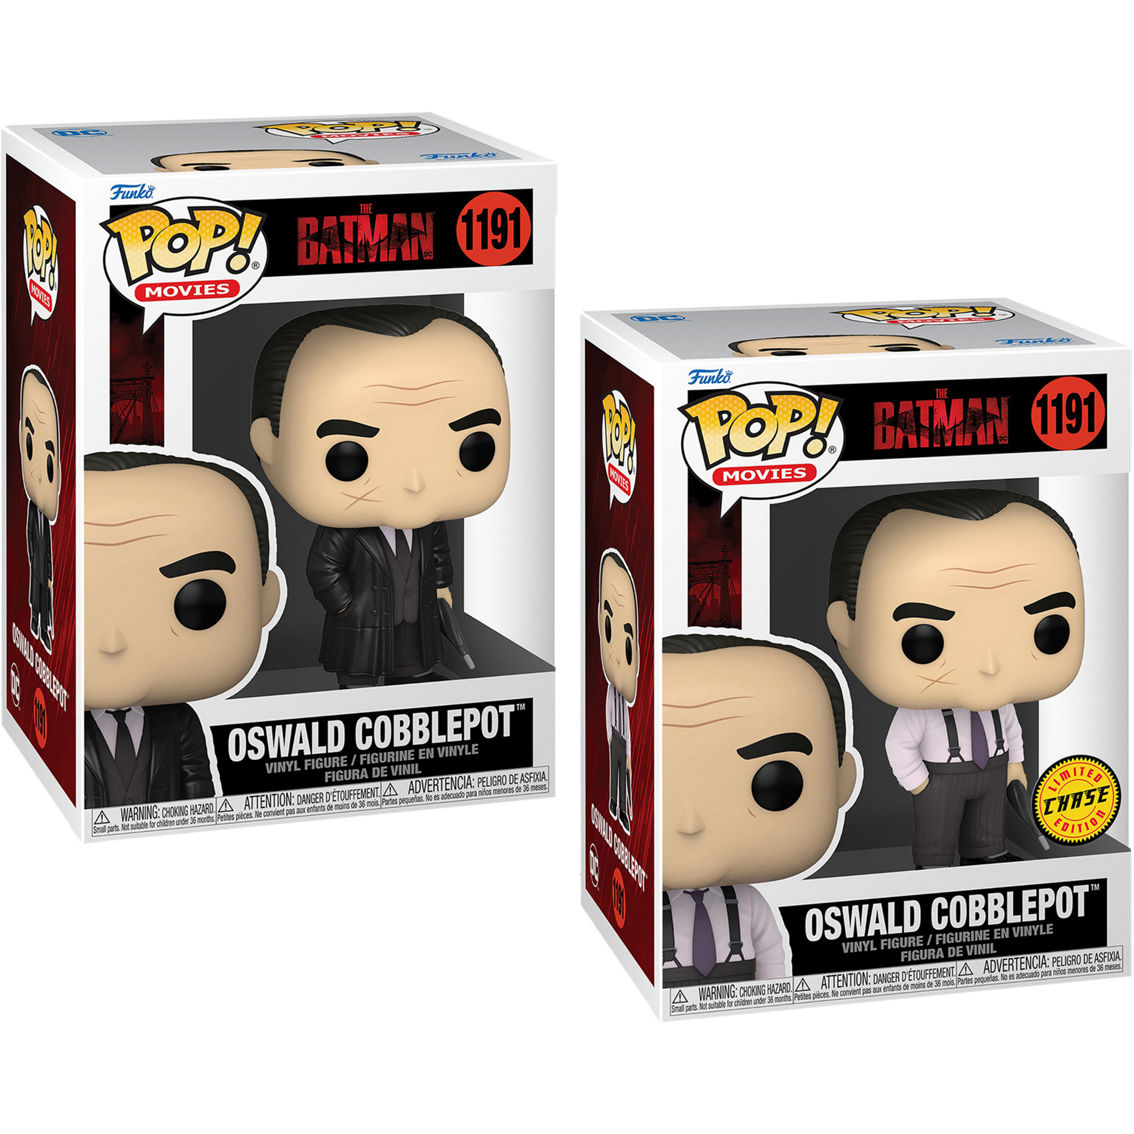 Funko POP Movies The Batman Collector's Set - Image 7 of 8